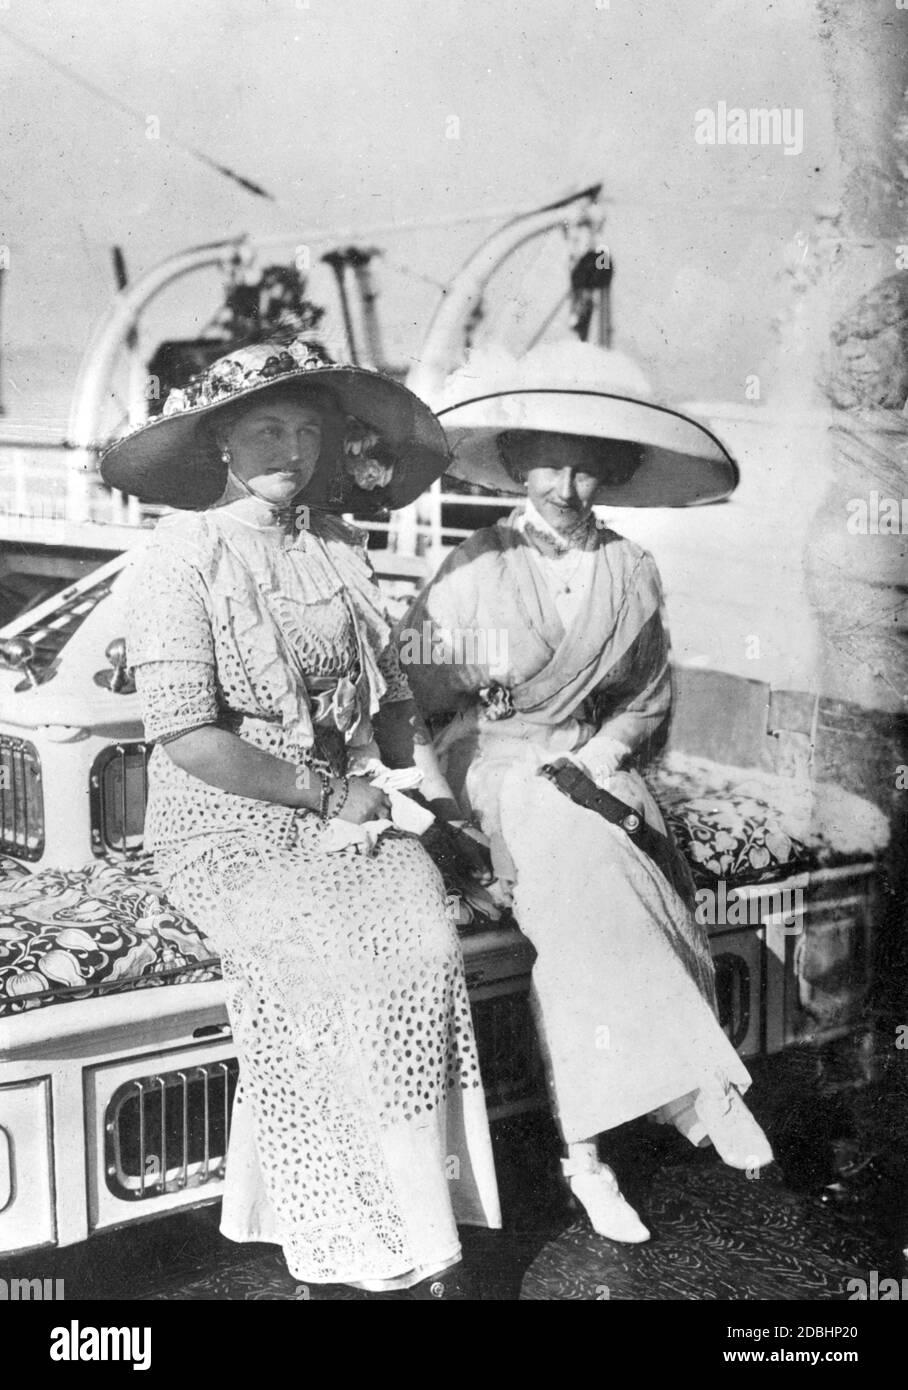 The princesses Alexandra Viktoria of Prussia (left, nee of Schleswig-Holstein-Sonderburg-Gluecksburg) and Victoria Louise of Prussia (right) are sitting on board the S.M.Y. Hohenzollern. They had sailed to Corfu together with the Emperor in 1912. Stock Photo